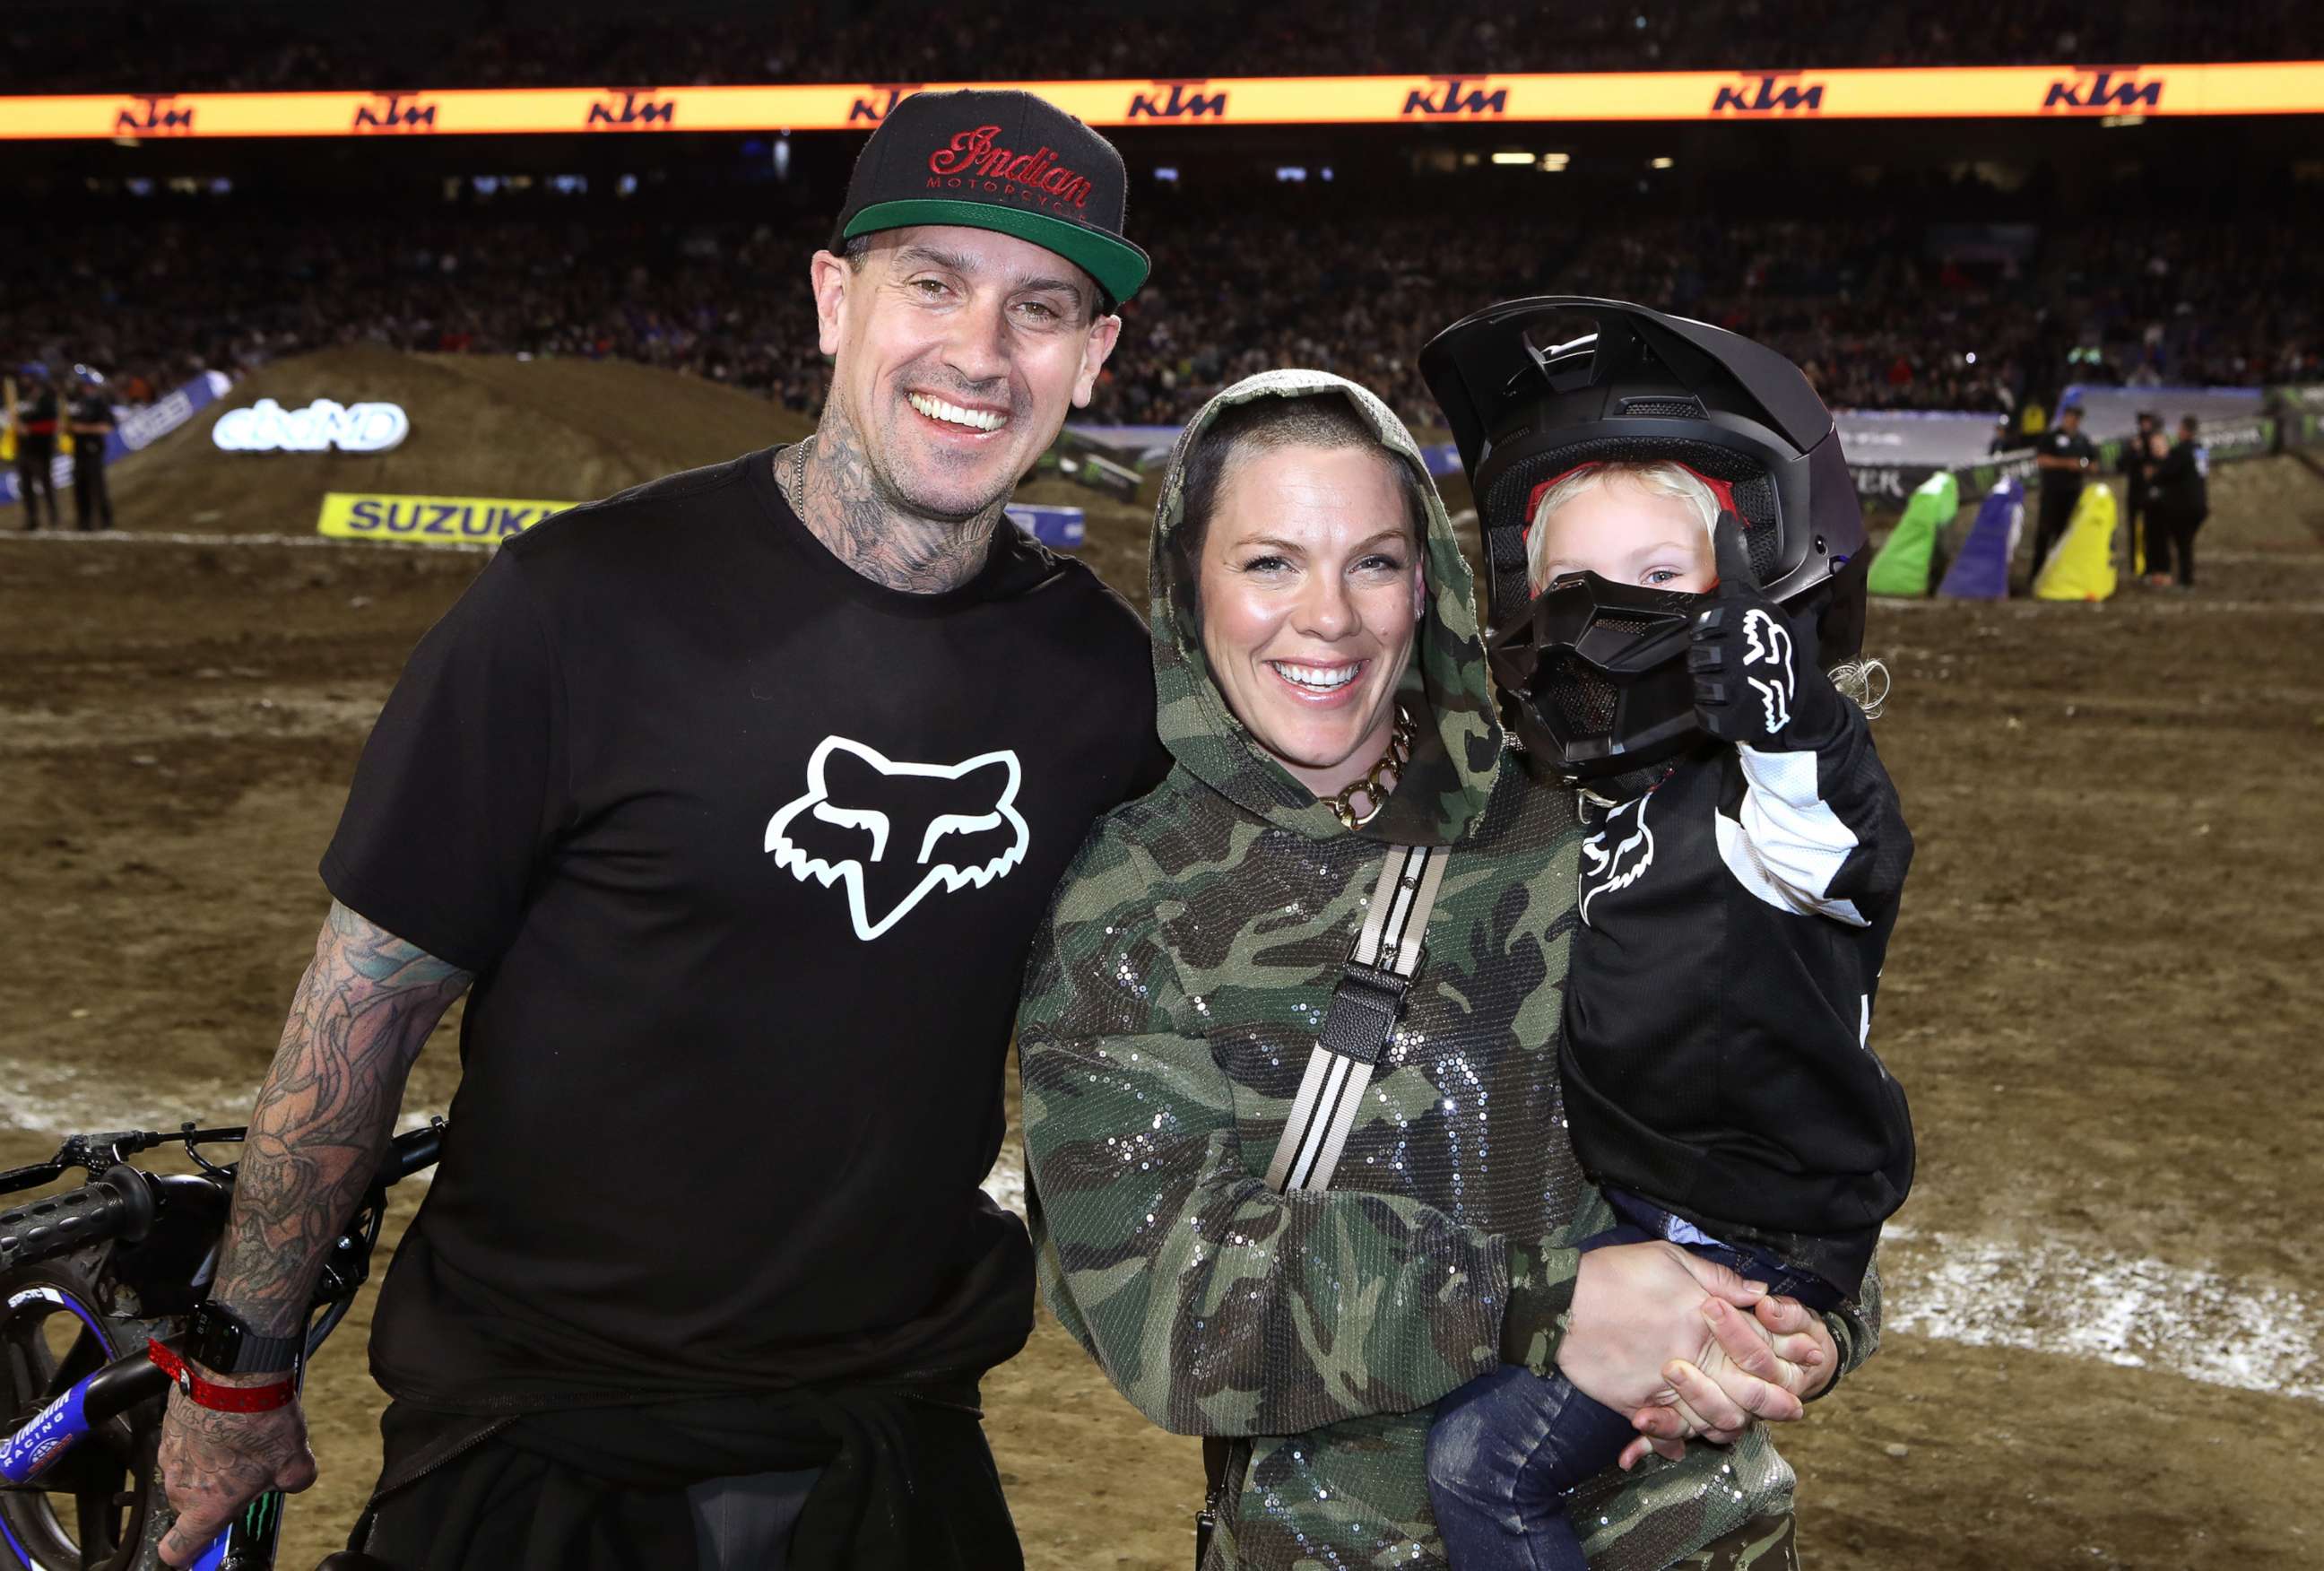 PHOTO: Carey Hart, P!nk and Jameson Moon Hart attend the Monster Energy Supercross VIP Event at Angel Stadium on Jan. 18, 2020 in Anaheim, Calif.